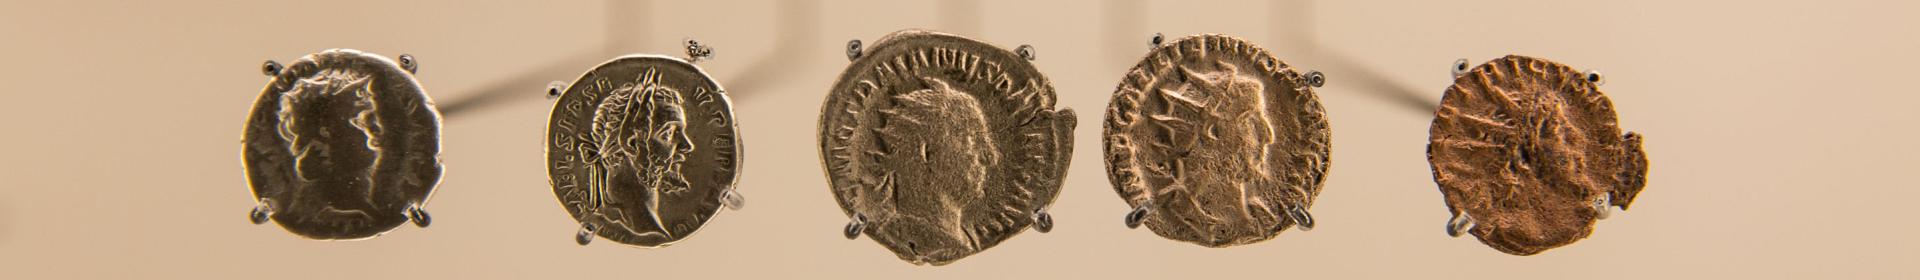 Image: Coins from the Beau Street Hoard